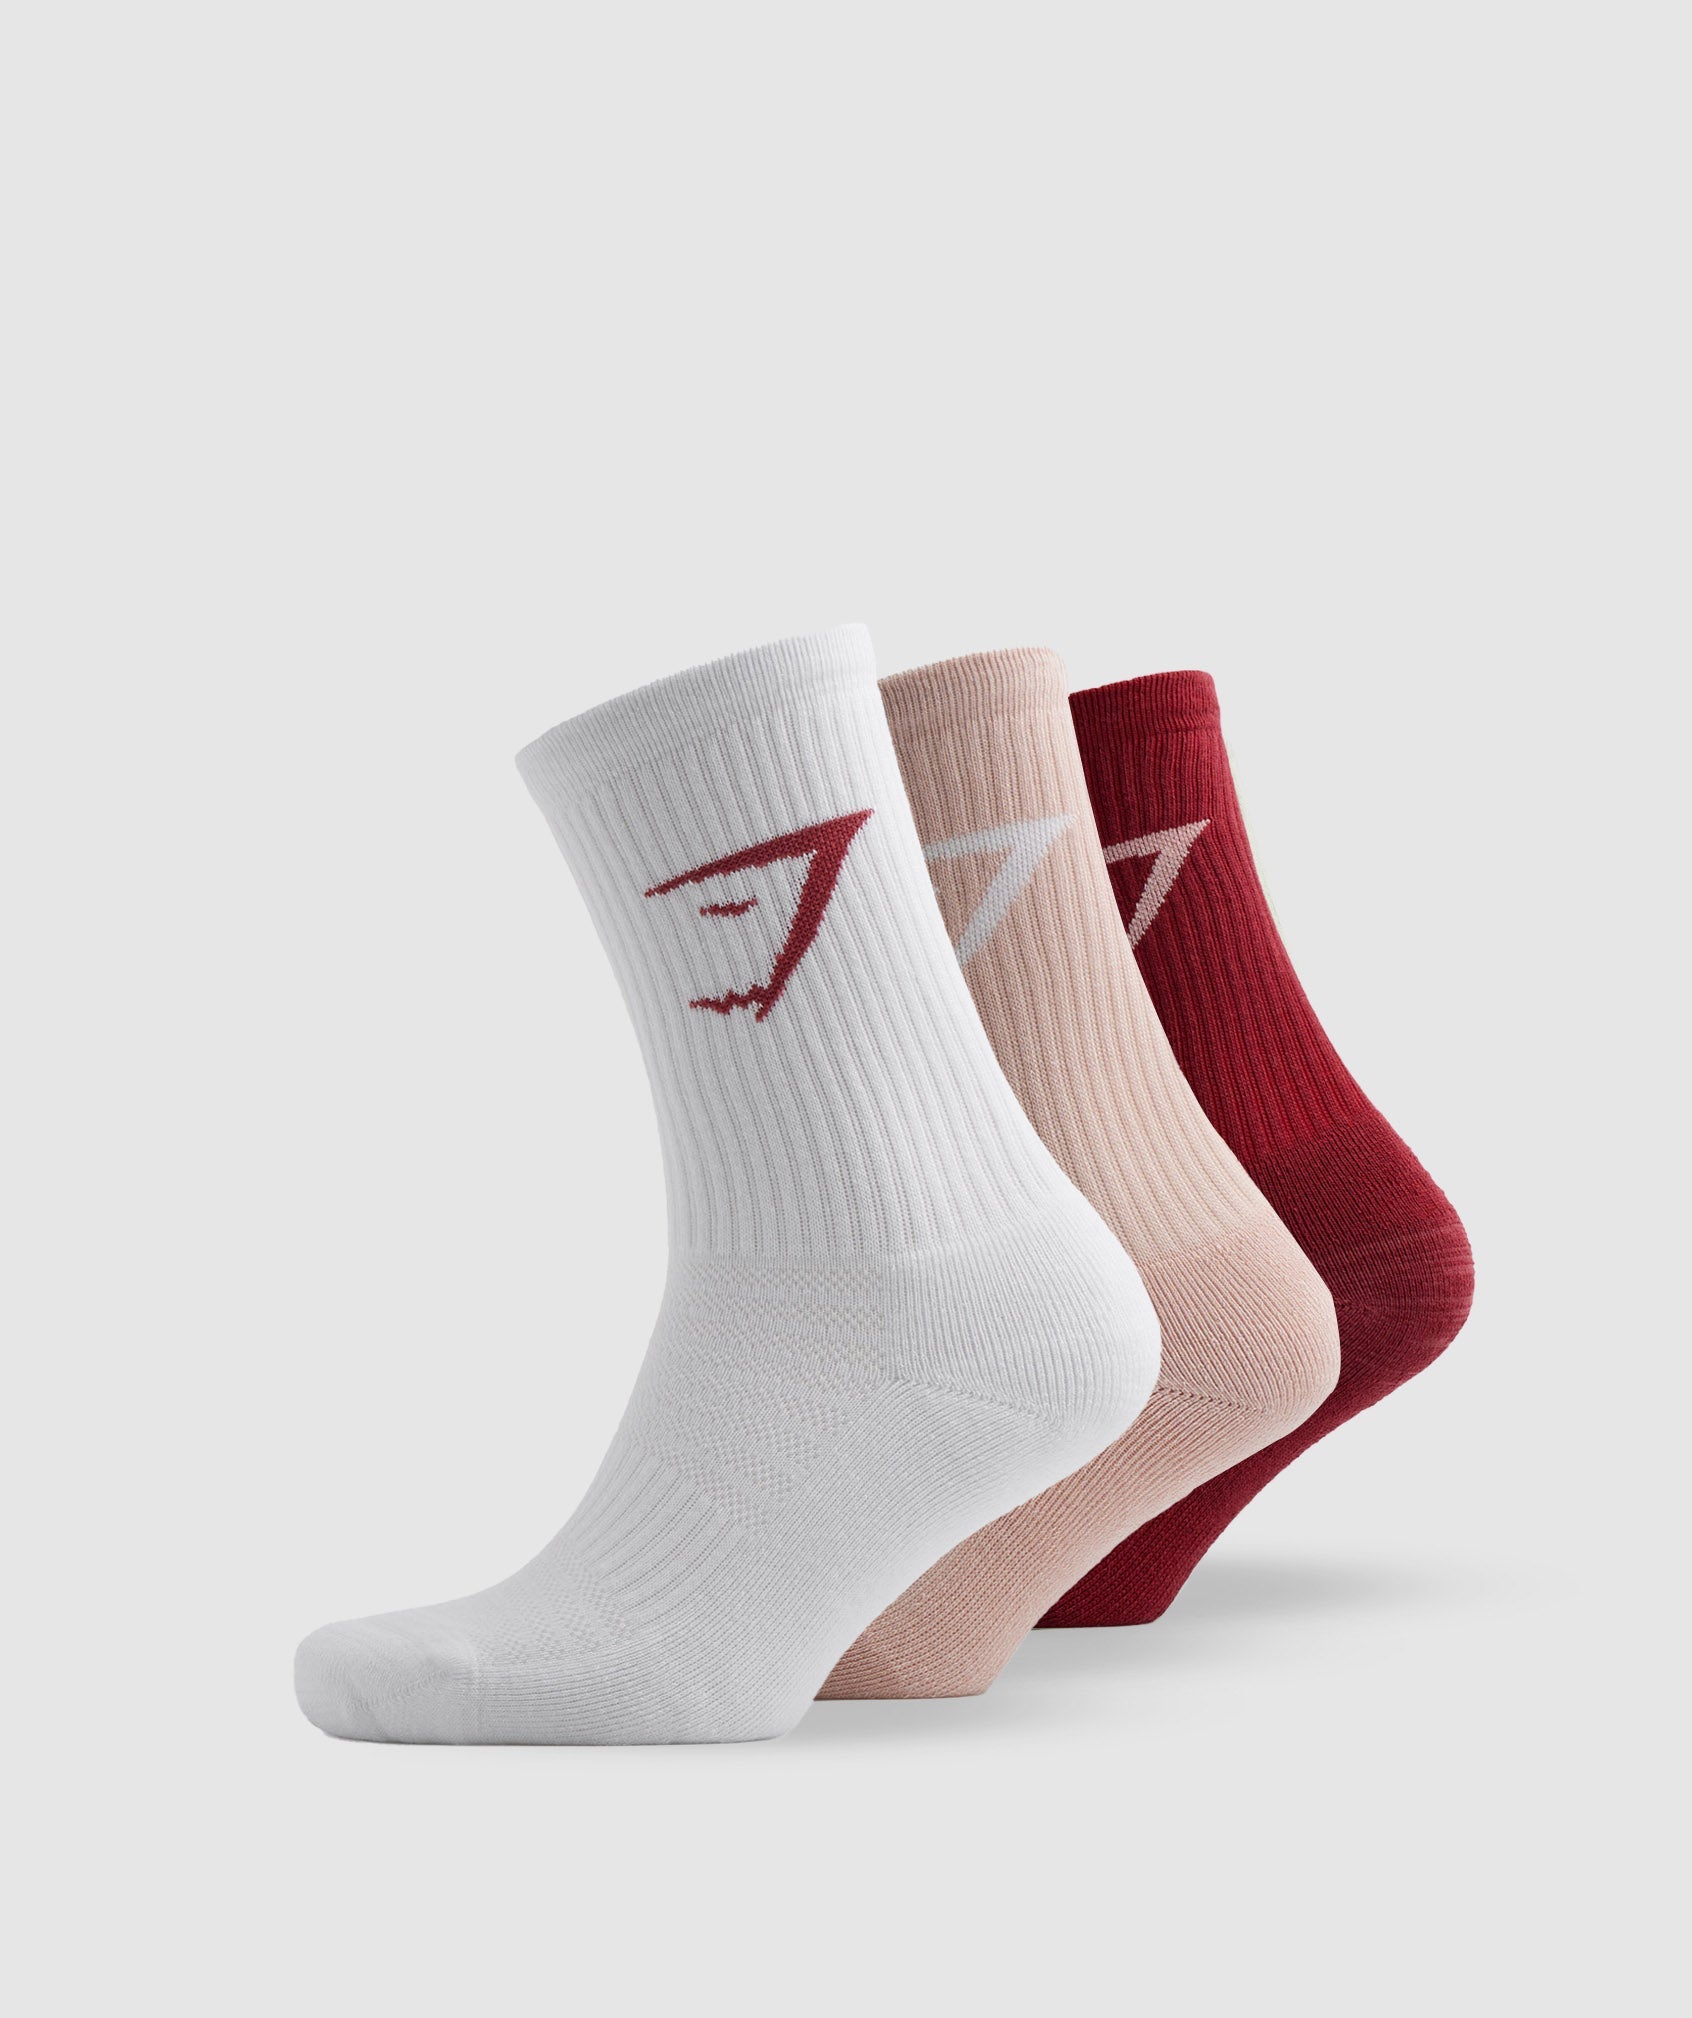 Crew Socks 3pk in White/Pink/Red - view 1